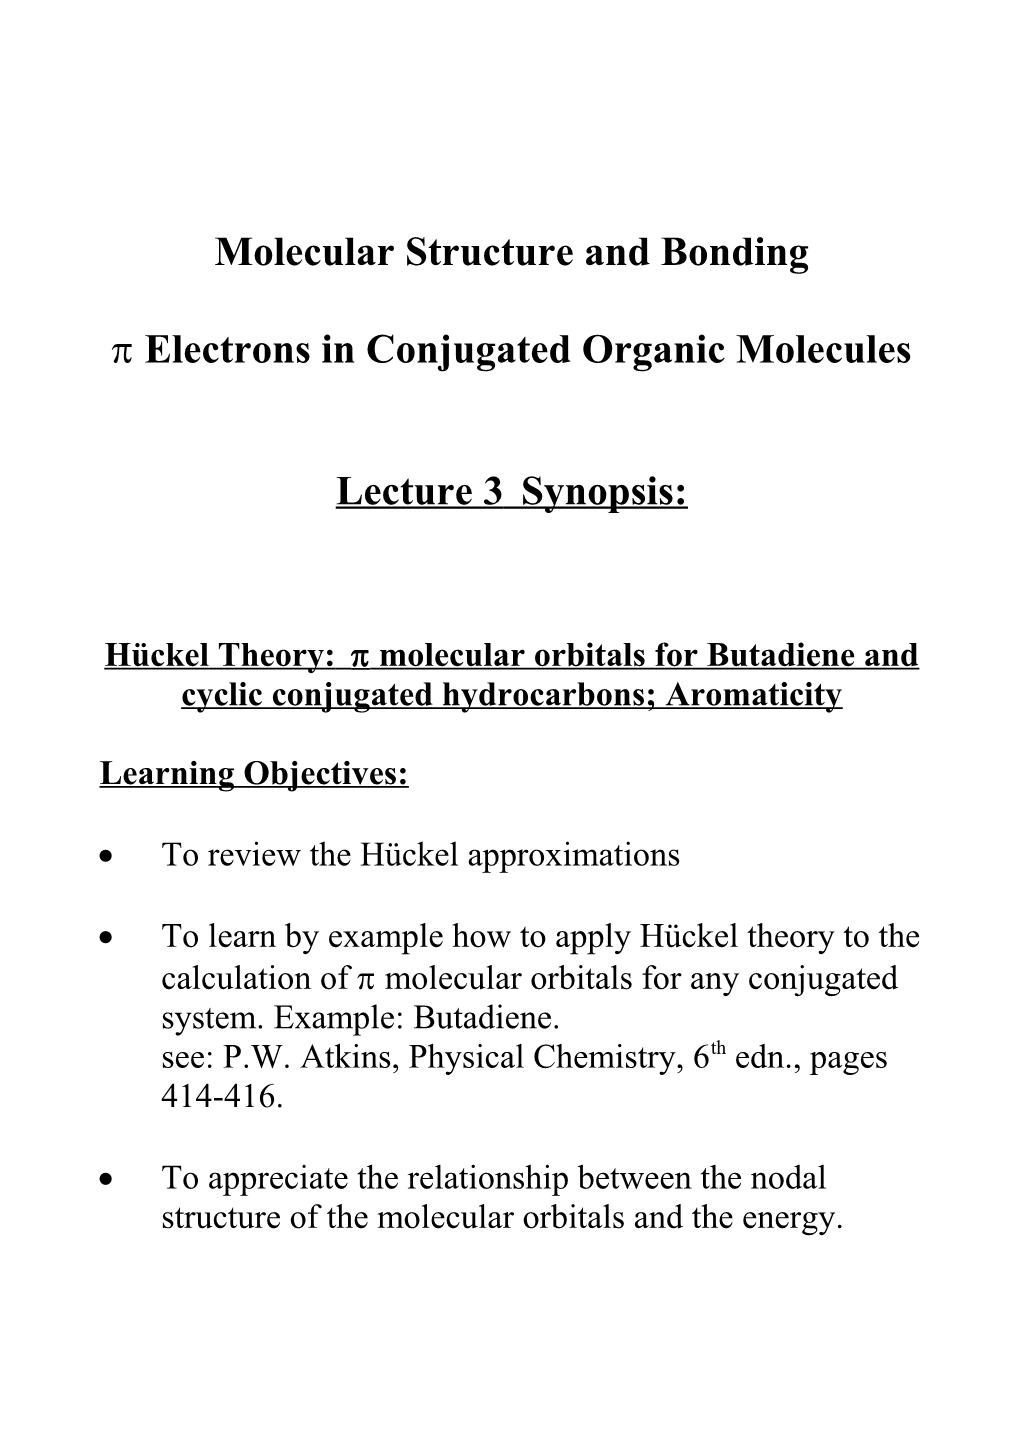 Molecular Structure and Bonding